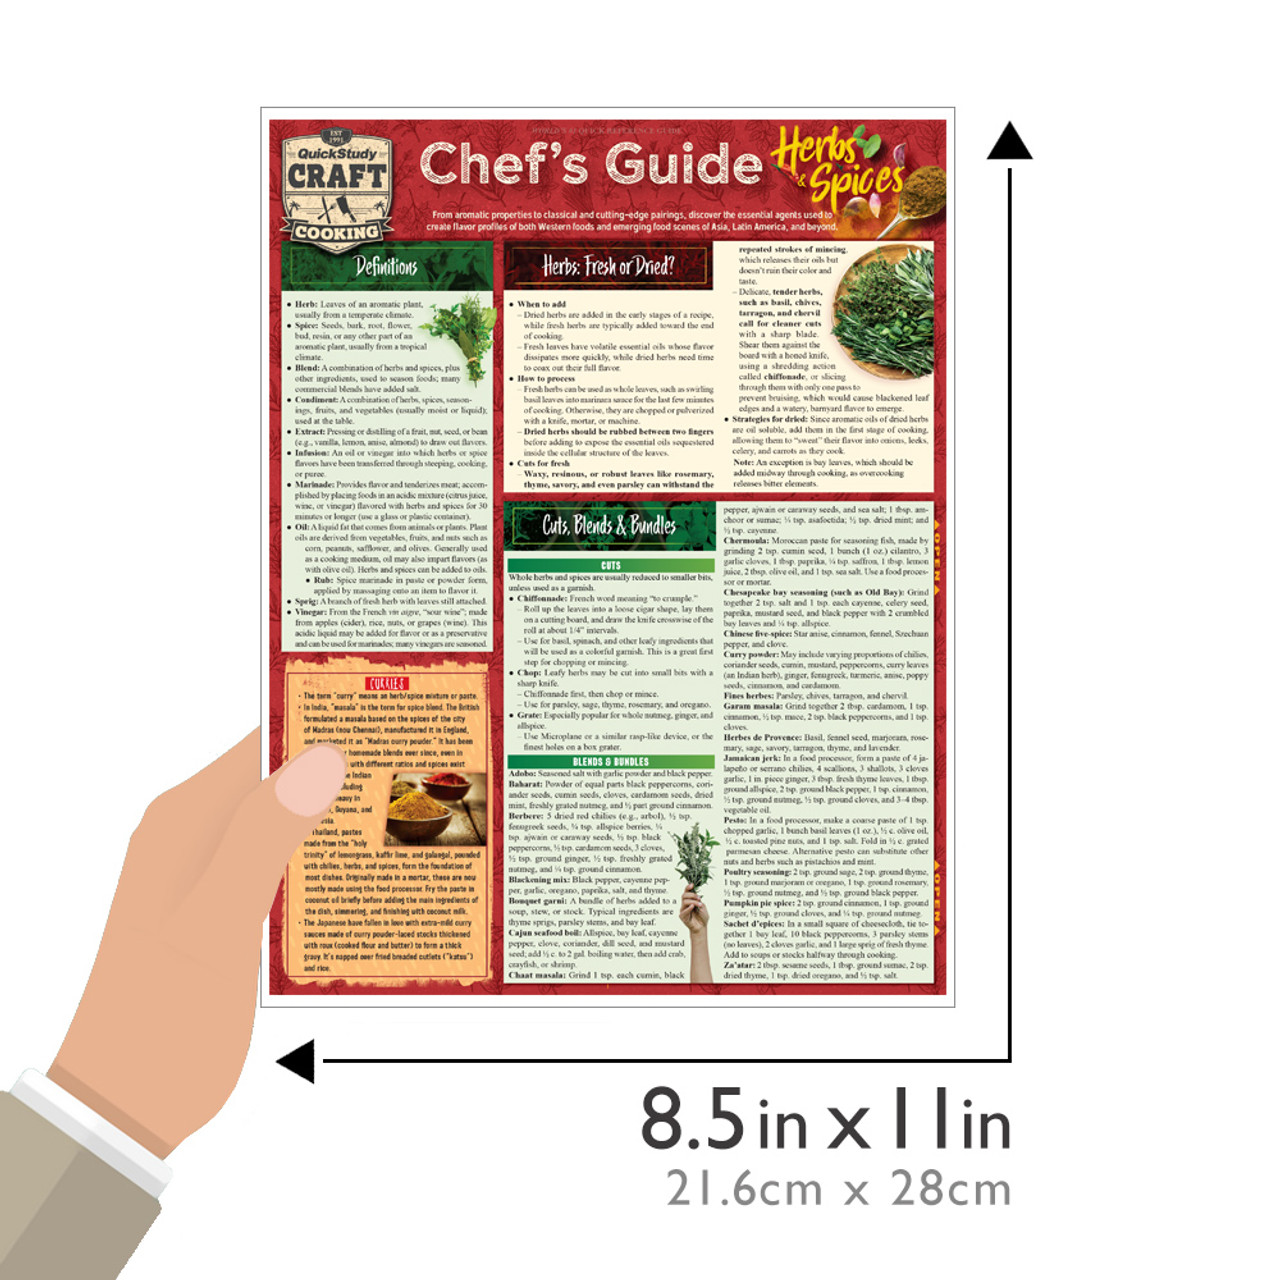 ARCHAEOLOGY OF HERBS & SPICES - Chinese 5 Spice - Chef's Mandala